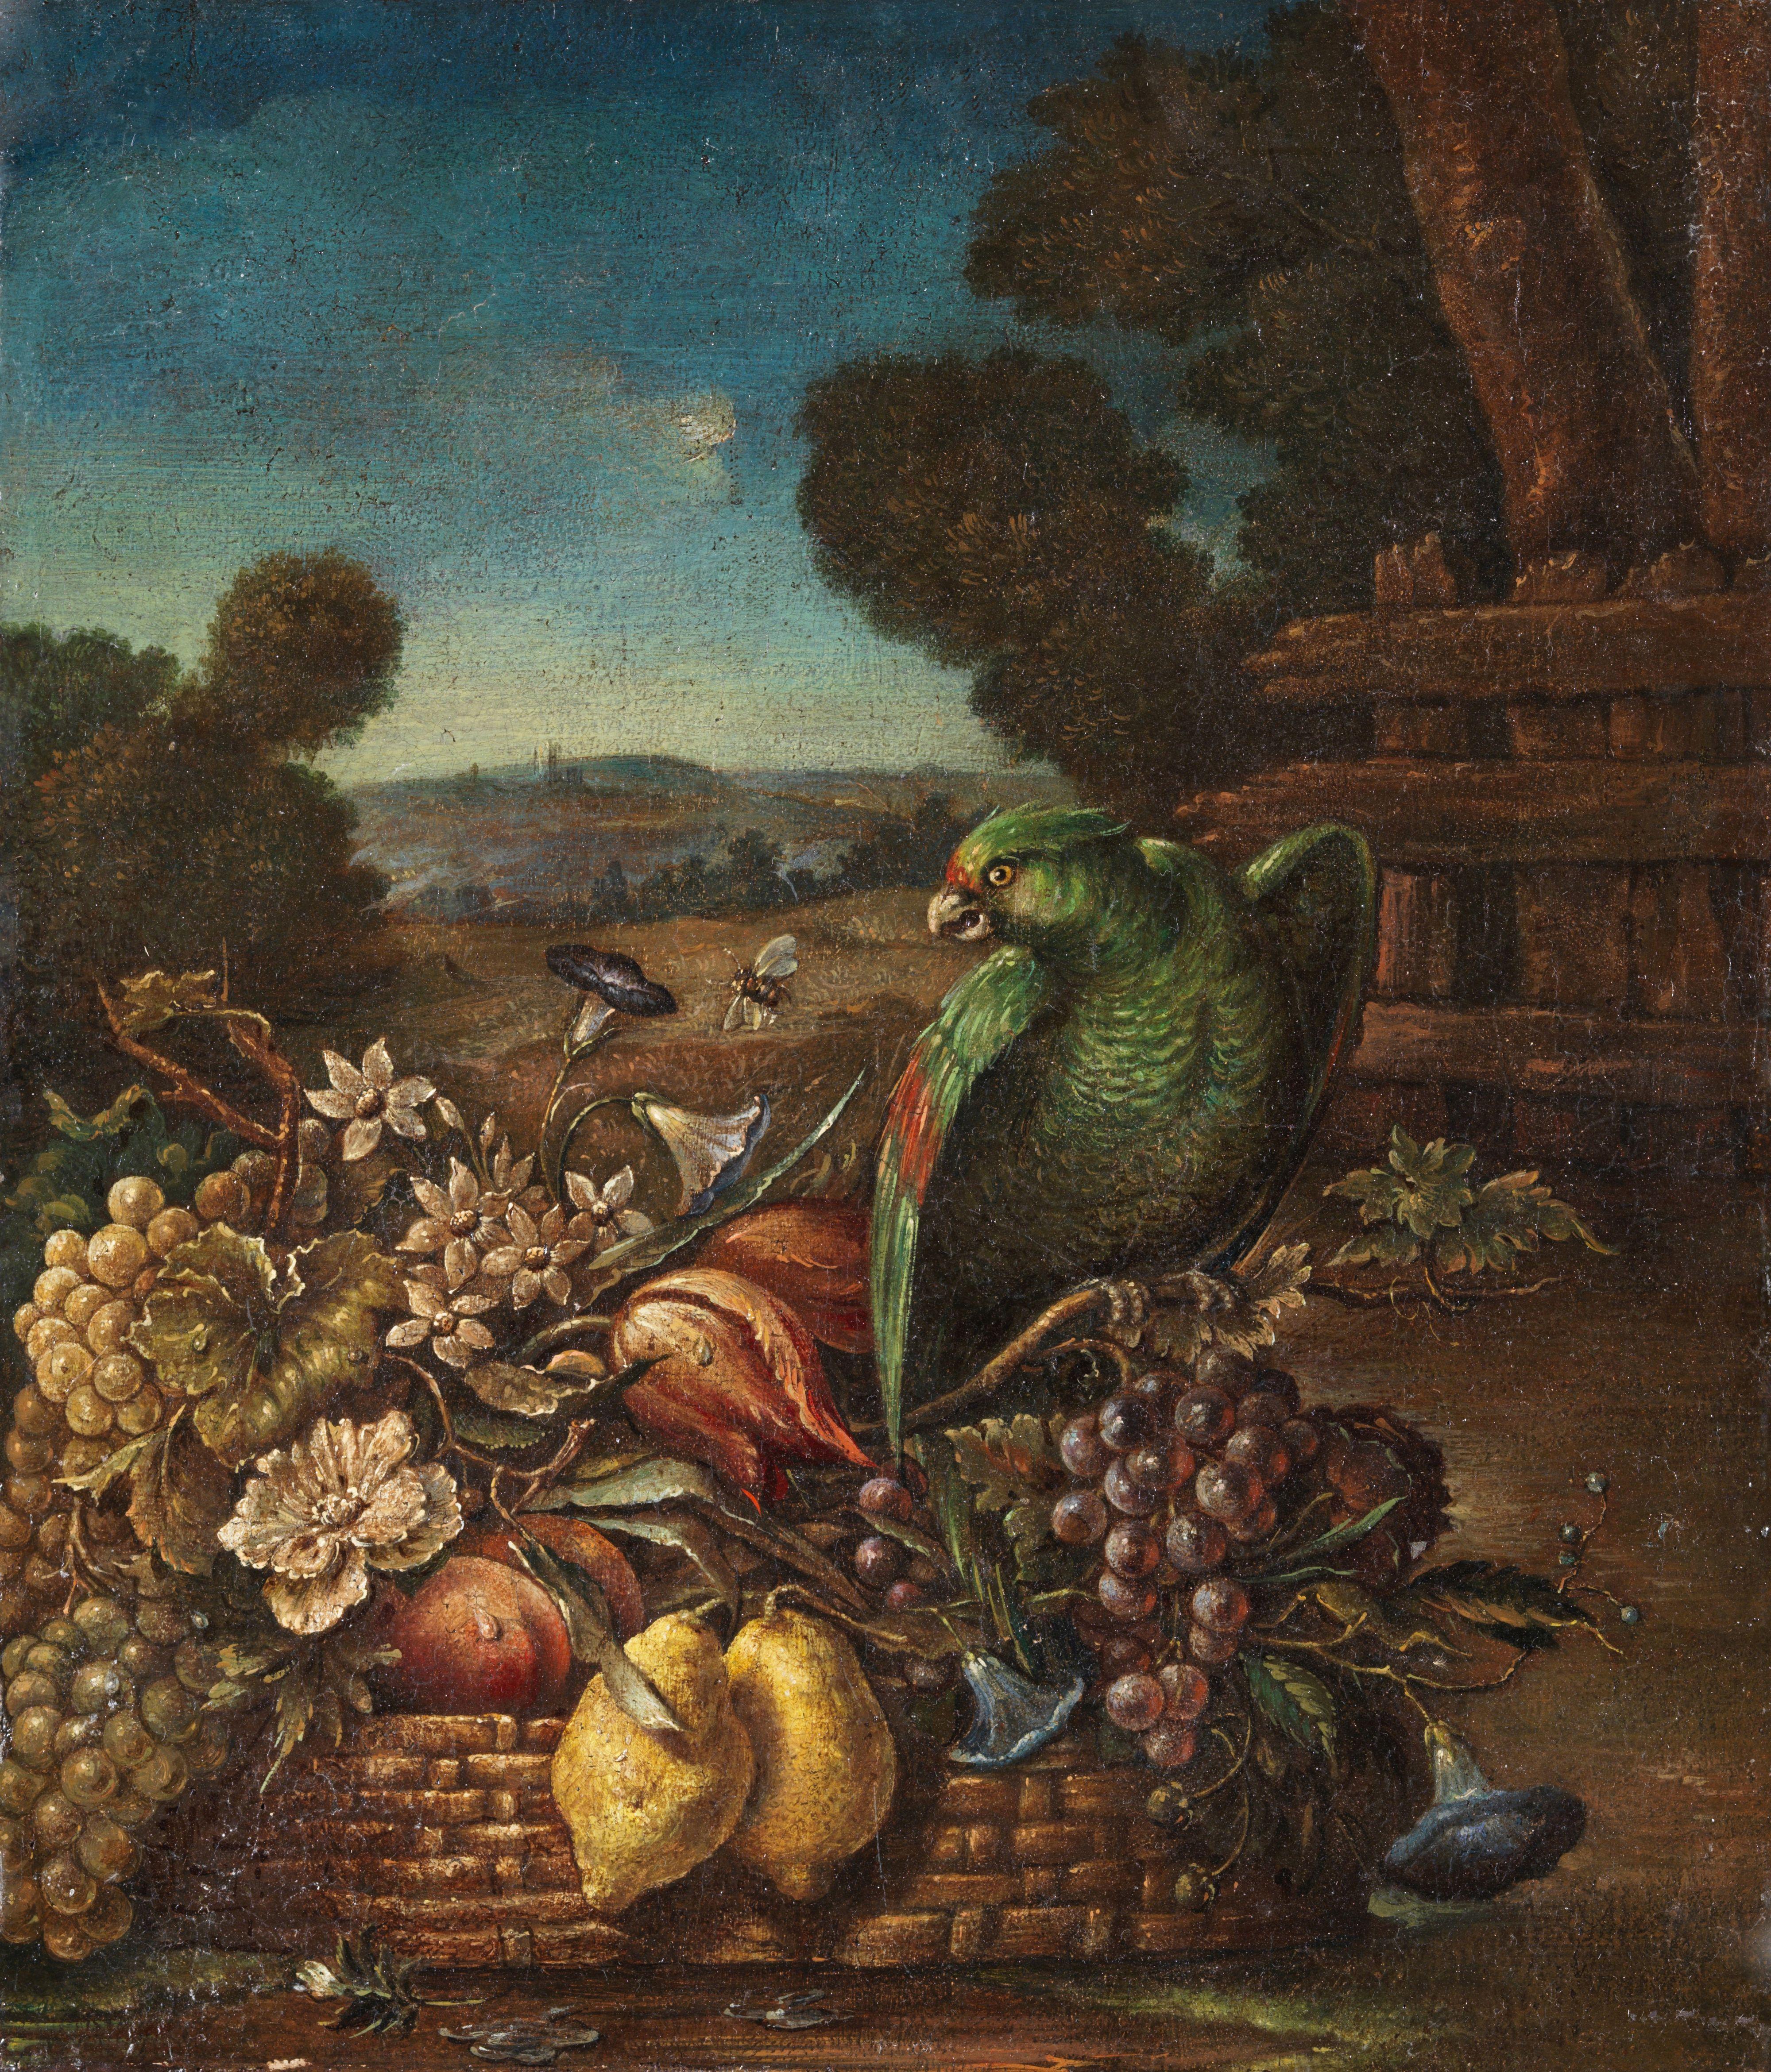 Pair of oil paintings on canvas measuring 45 x 35 without frame and 50 x 40 cm with frame depicting two still lifes of flowers, fruit and parrots from the early 18th century Roman school. 

The couple may relate to a pictorial school that approaches